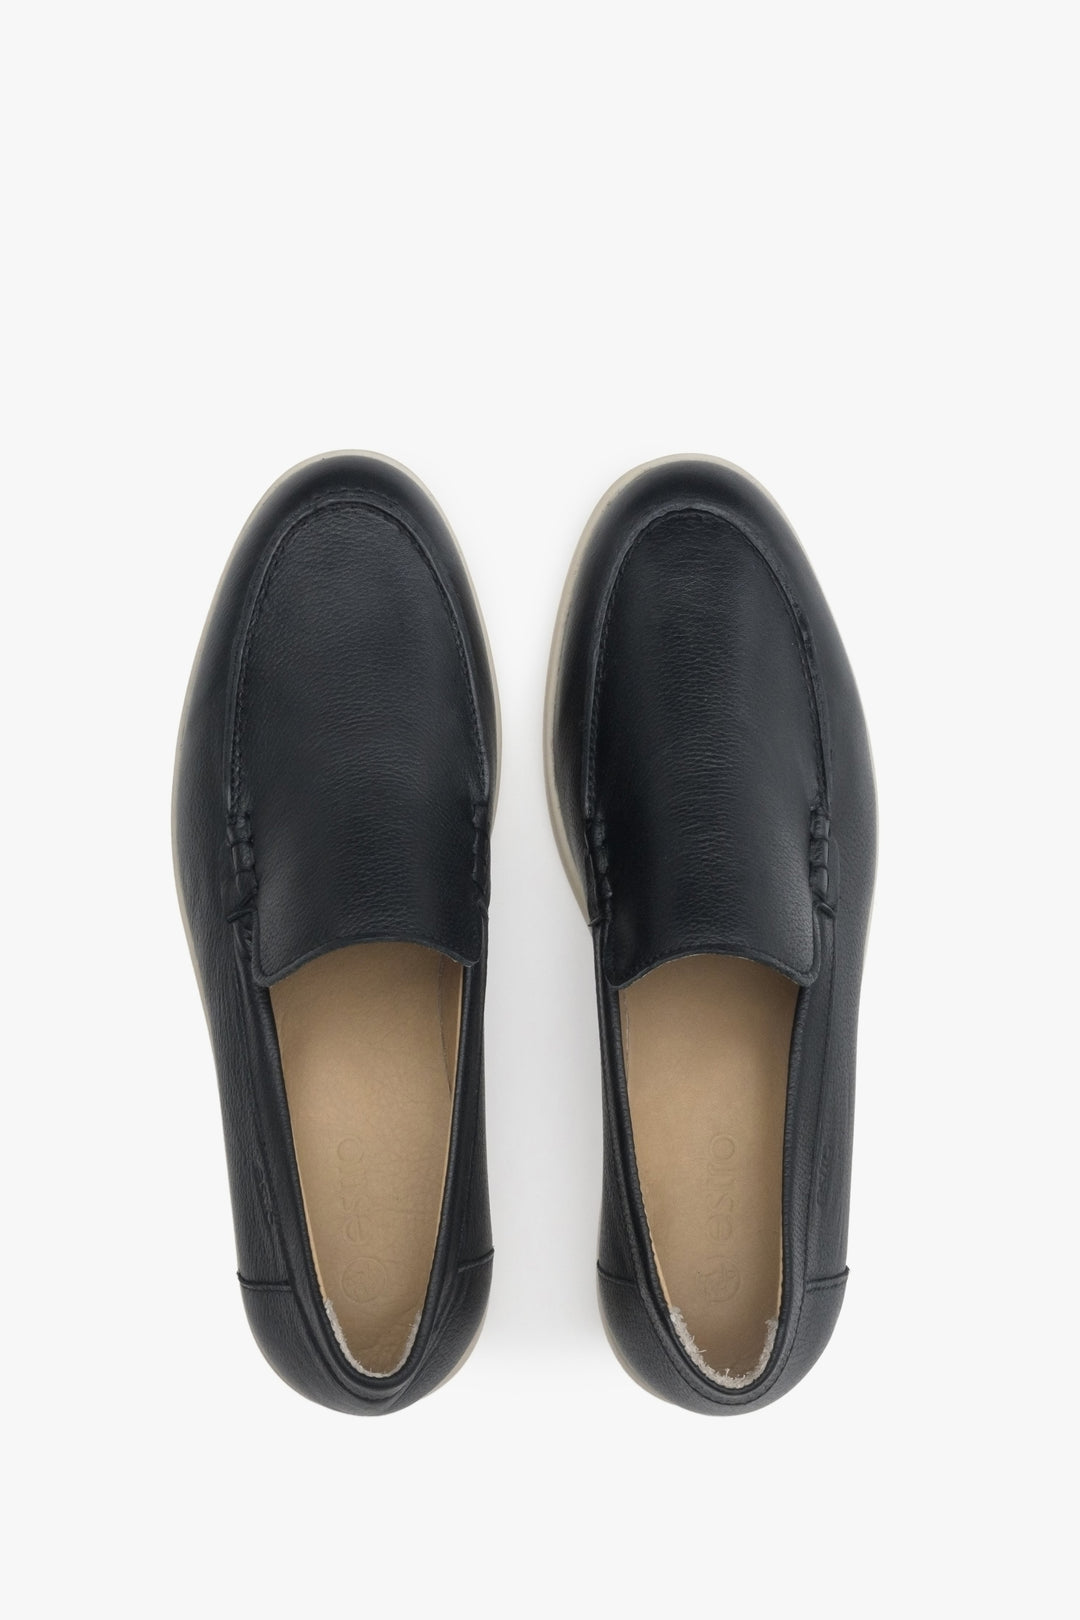 Women's black leather slip-ons - presentation of a shoe toe and sideline.